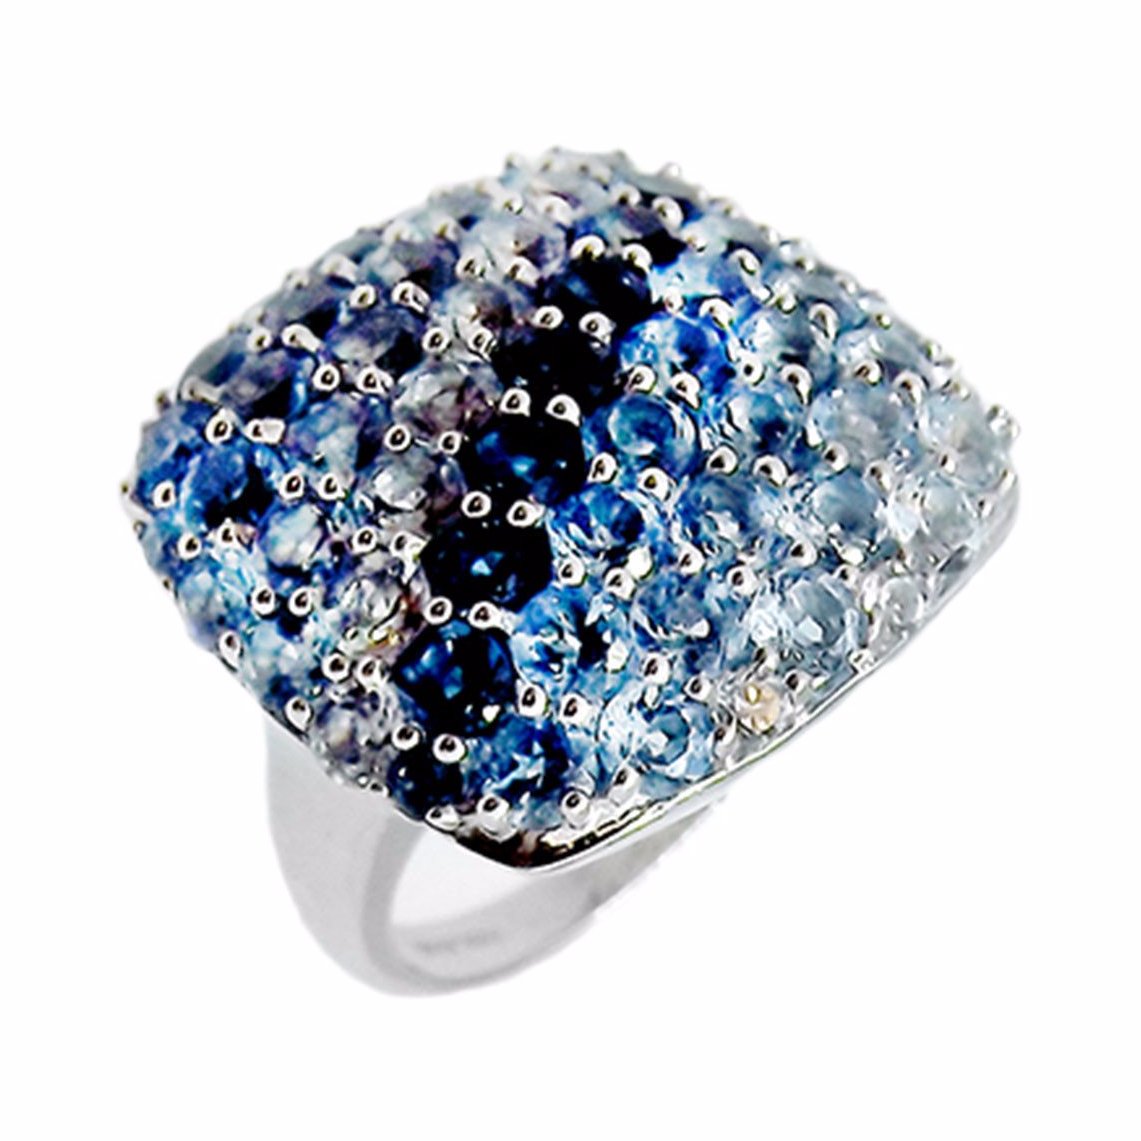 Ombre Blue Topaz Ring